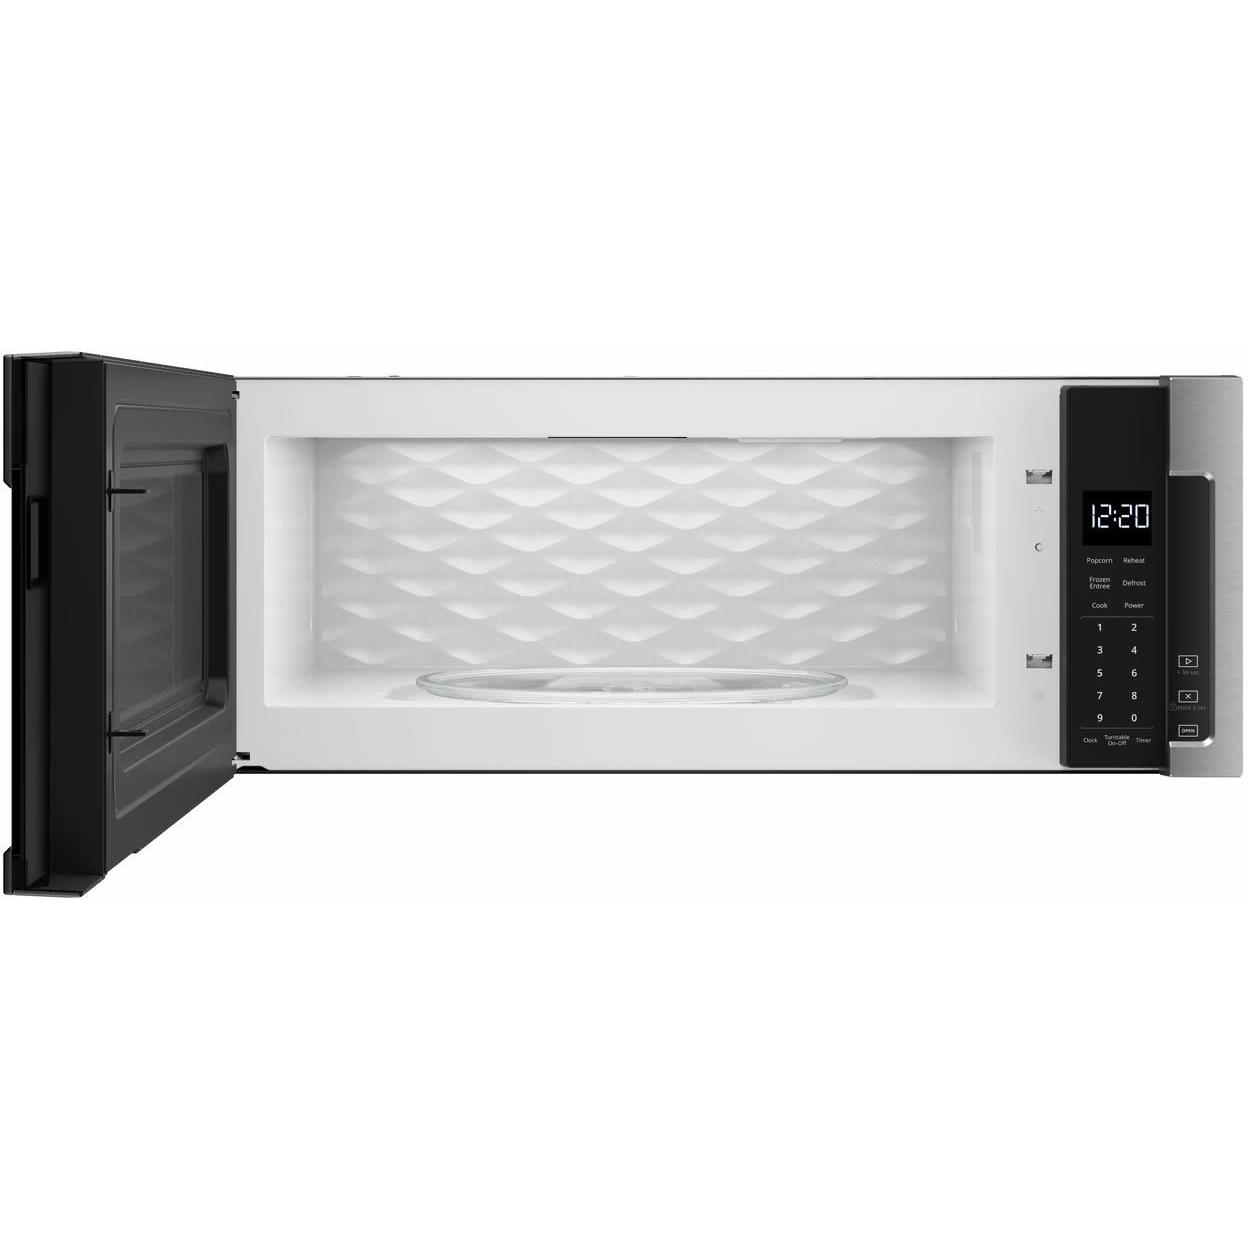 Whirlpool 30-inch, 1.1 cu. ft. Over The Range Microwave Oven WML55011HS